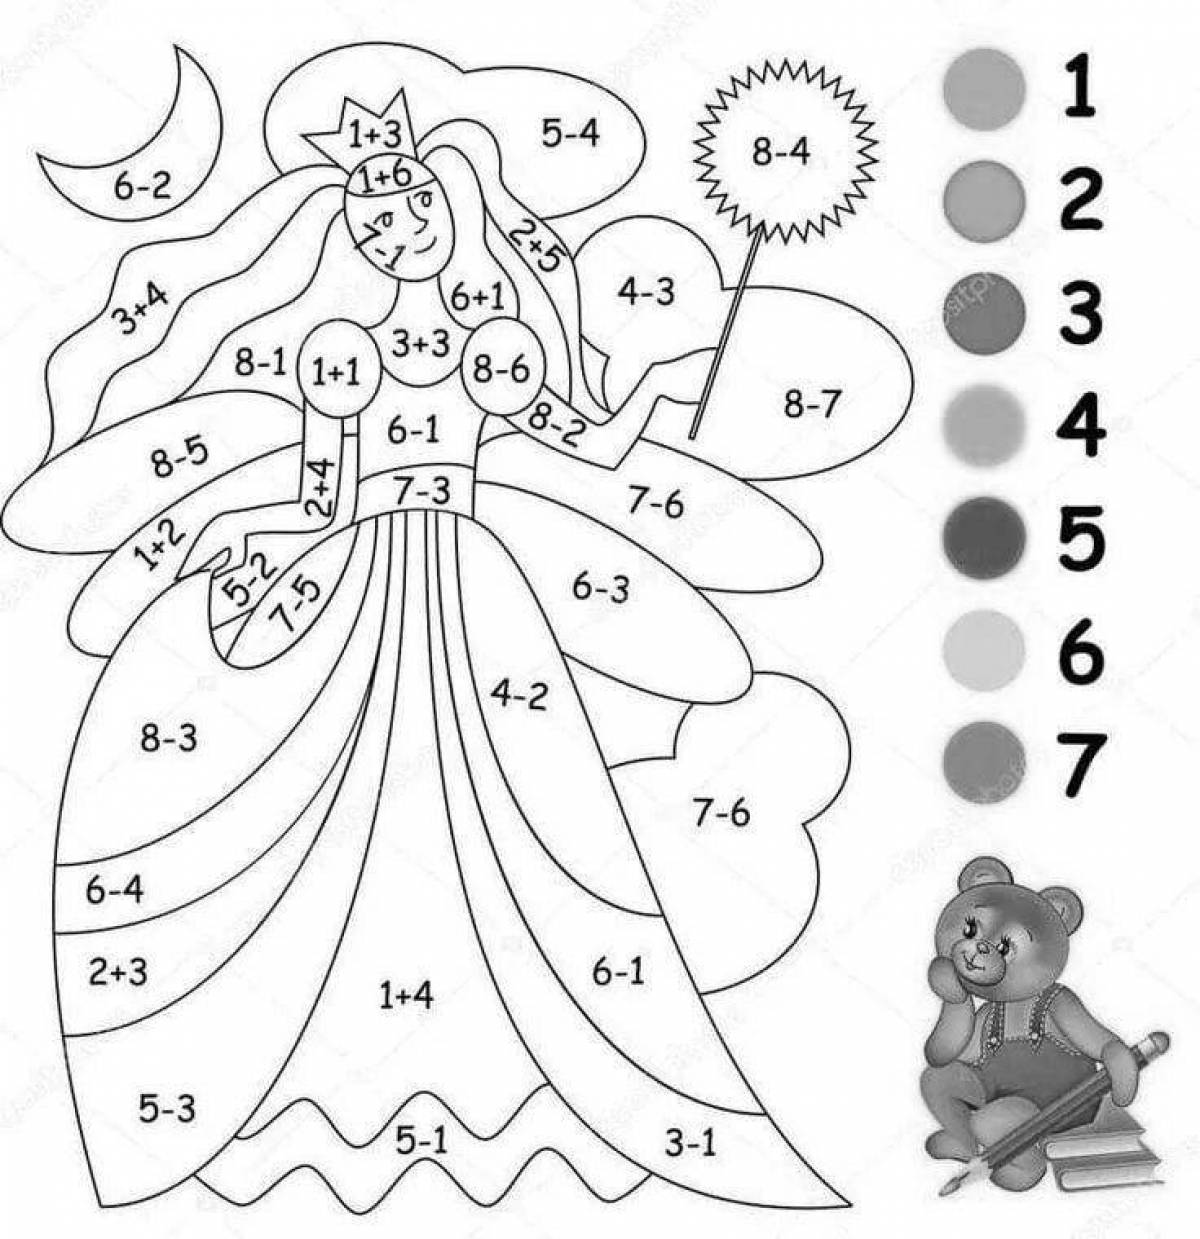 Fascinating math coloring book for kids 5-7 years old